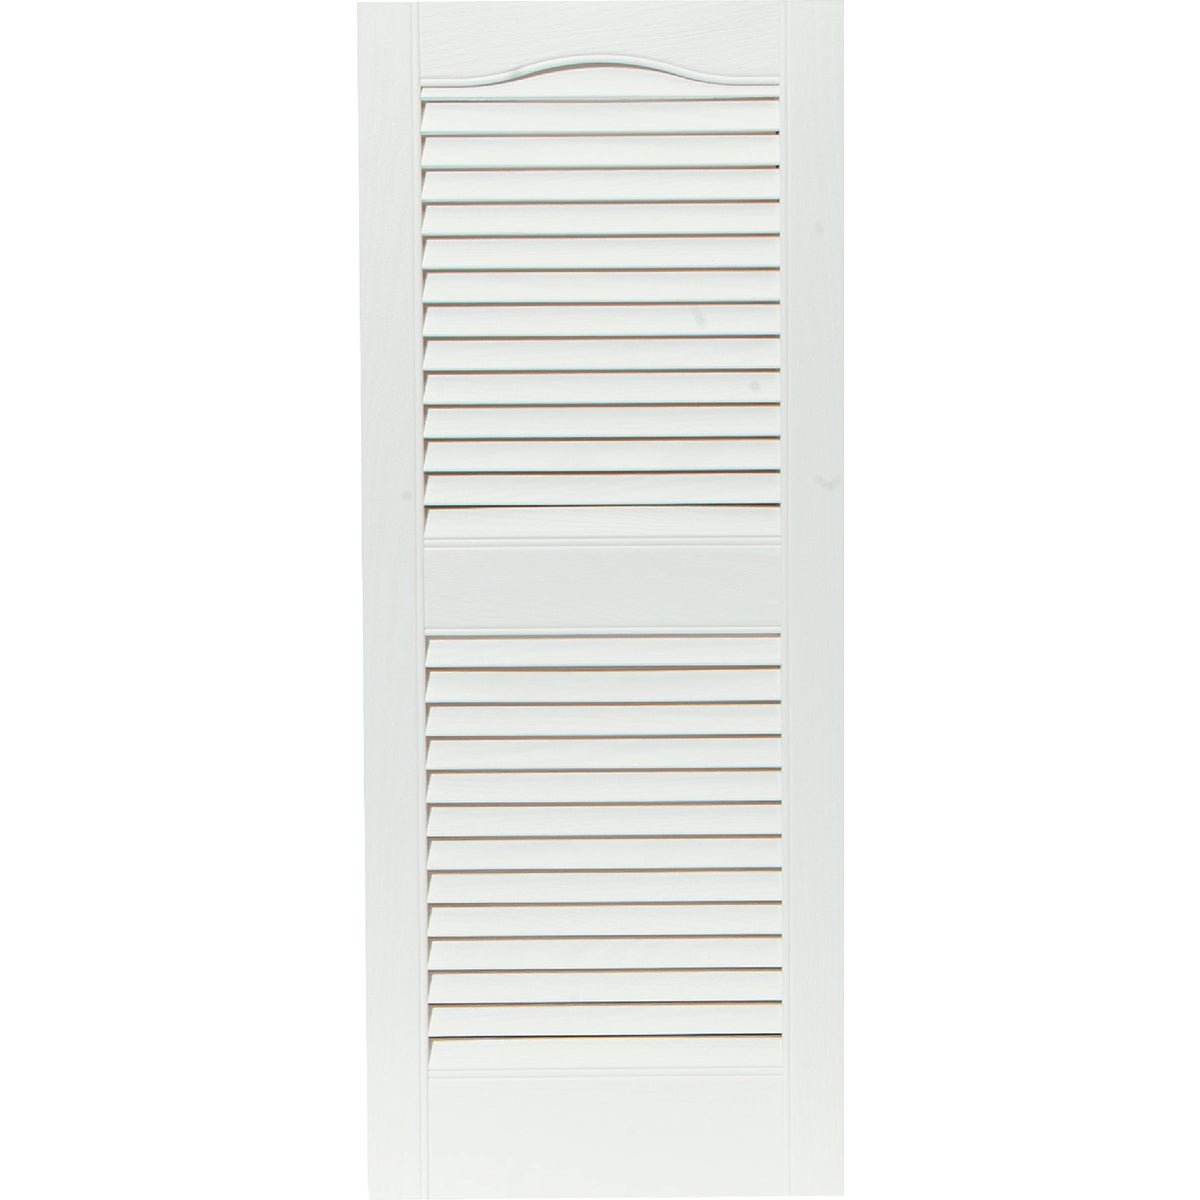 Item 160016, All shutters open louvered cathedral top with center rail and 15" wide.